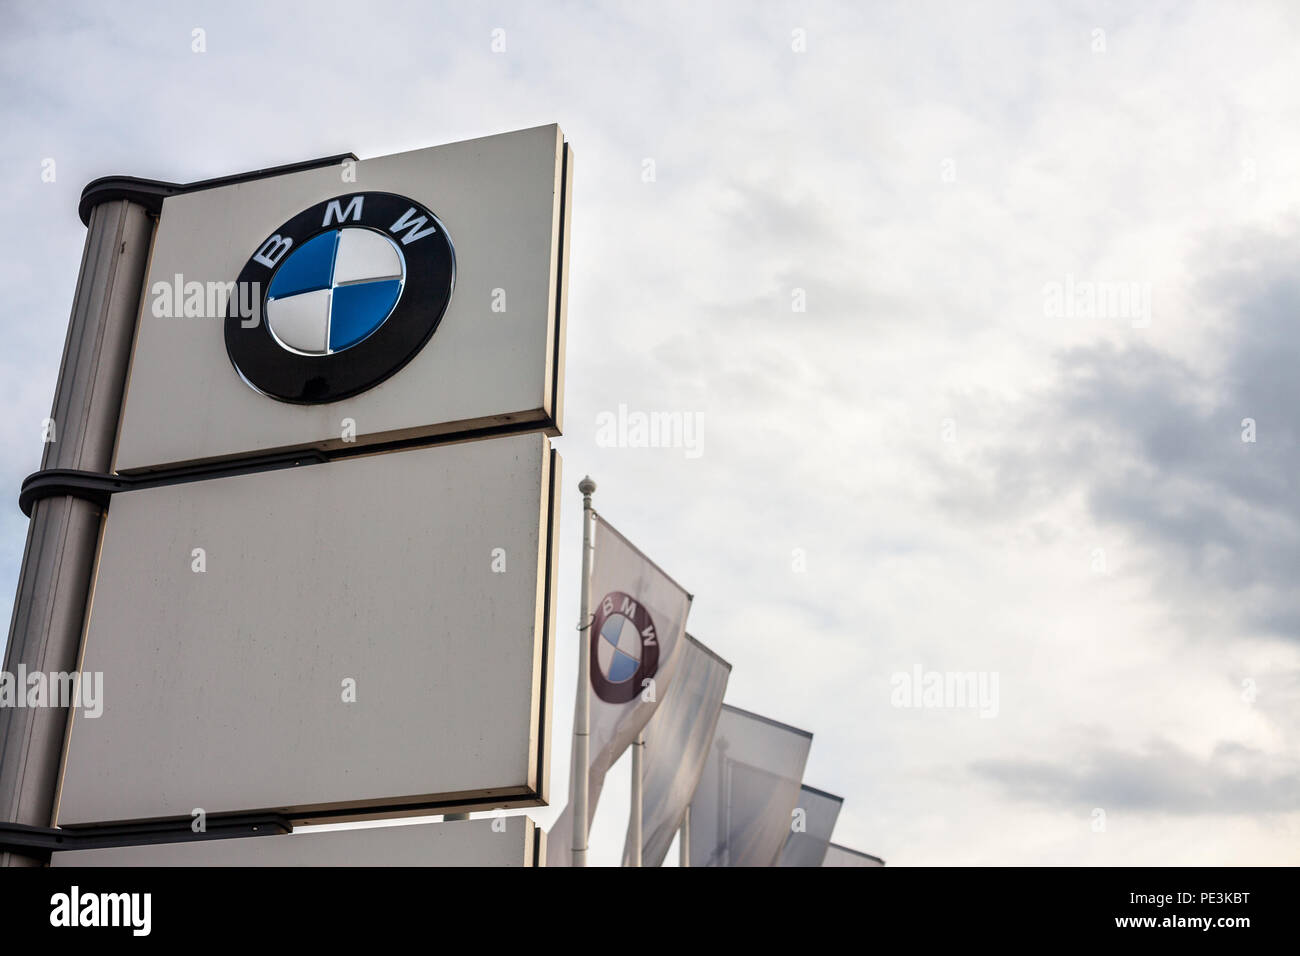 BELGRADE, SERBIA - AUGUST 11, 2018: BMW logo on their main dealership store Belgrade. BMW is a German car and automotive manufacturer, specialized in  Stock Photo